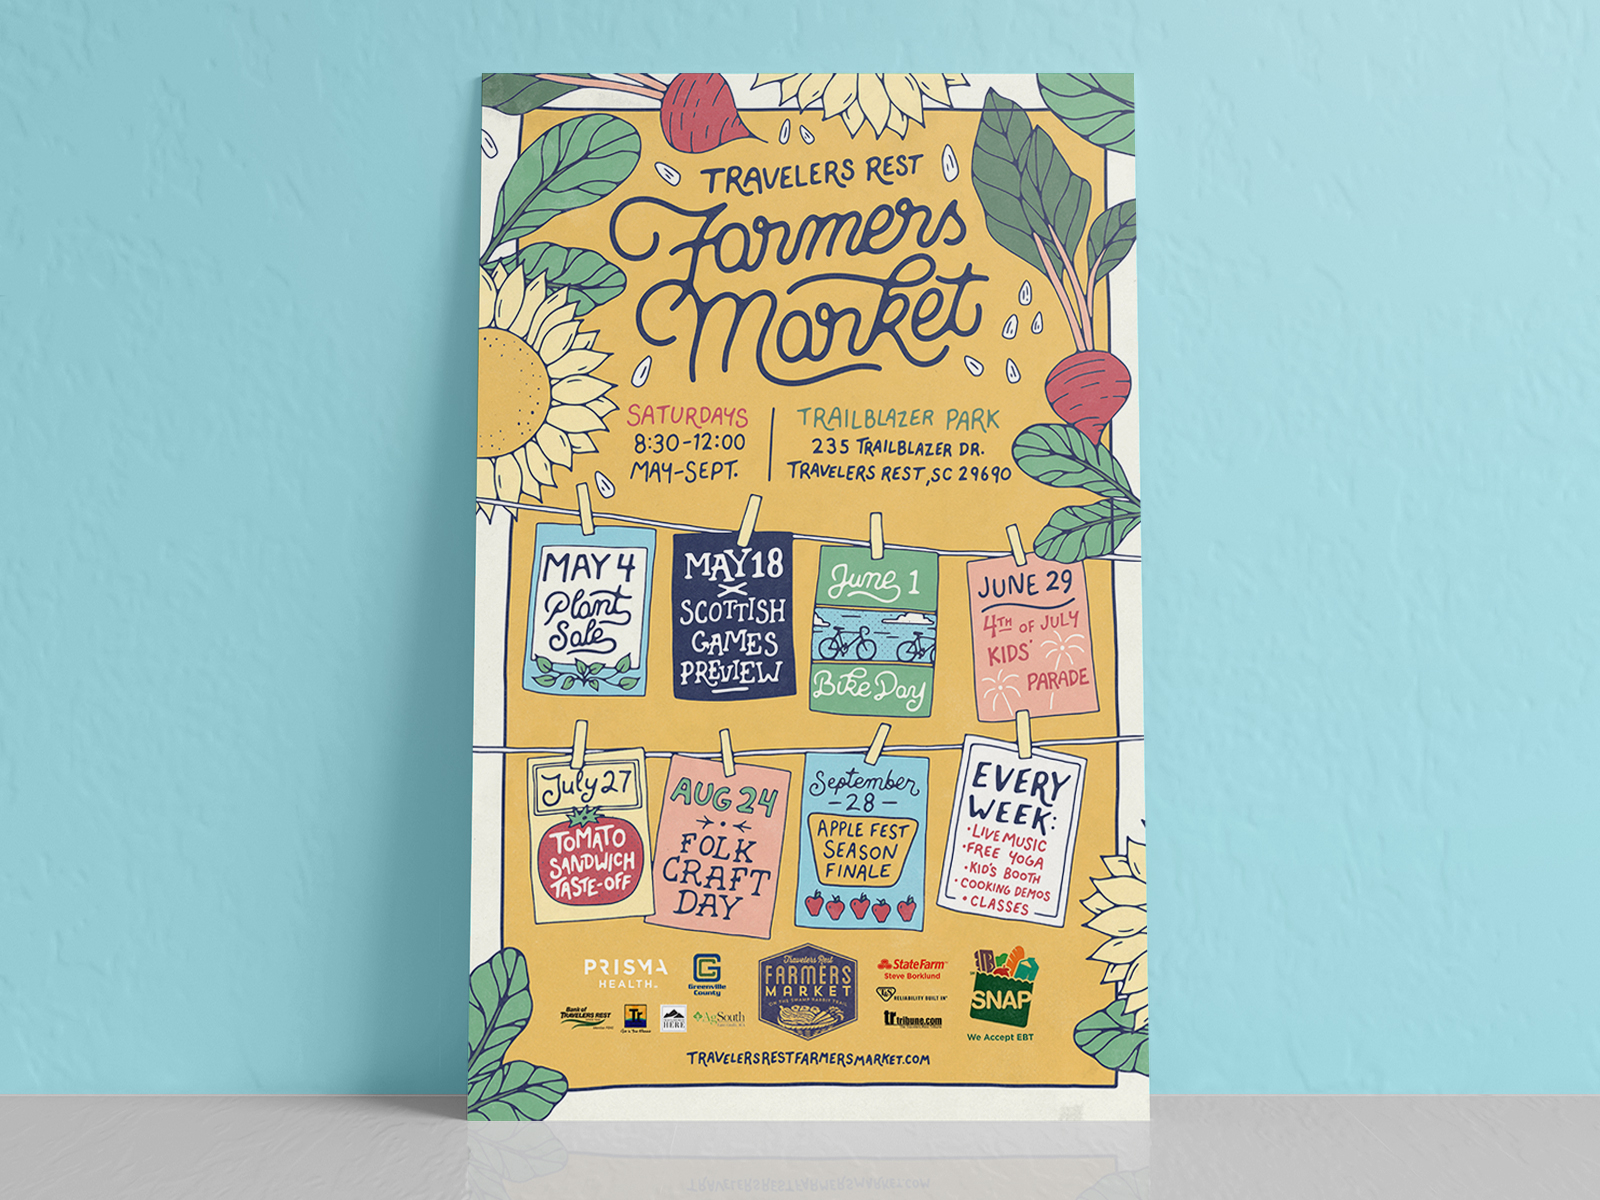 Travelers Rest Farmers Market 2019 Poster by Jesse Bowser